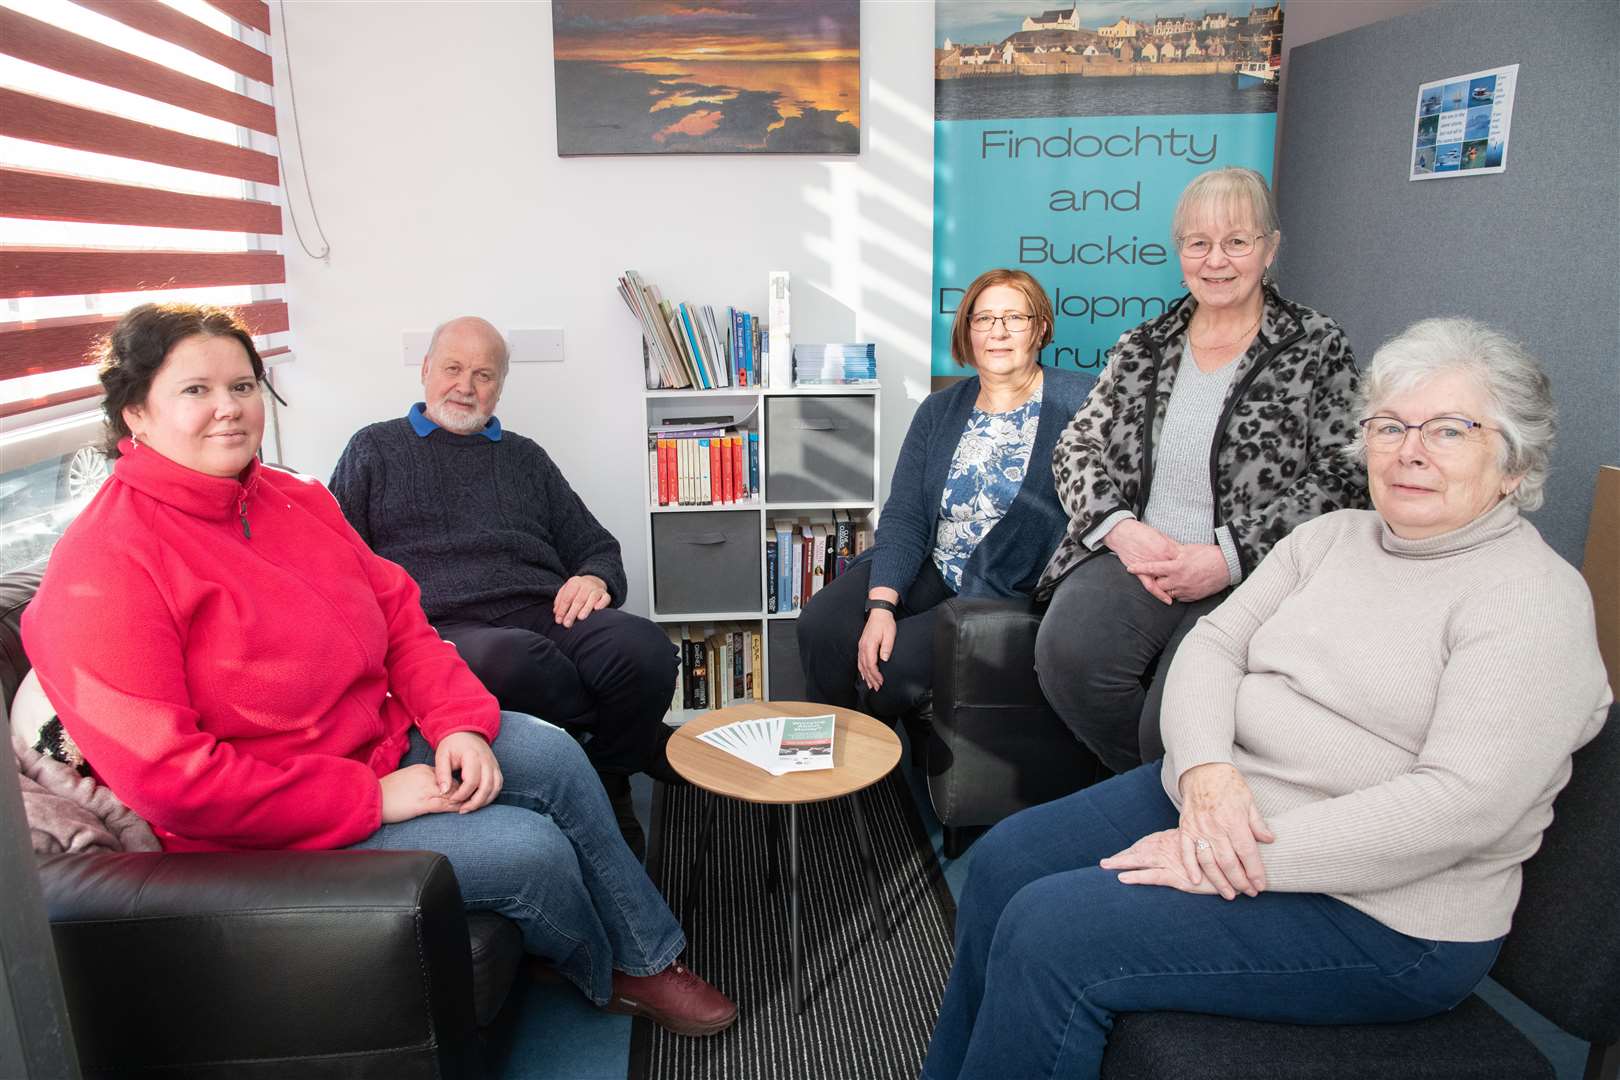 Findochty and Buckie Development Trust Steering Group chairwoman (second right) is joined by (from left) Anna Tumanova (Hub volunteer), Gordon McDonald (trust member), Sheila Sellar (NHS Grampian Healthpoint), and Linda McDonald (trust member). Picture: Daniel Forsyth